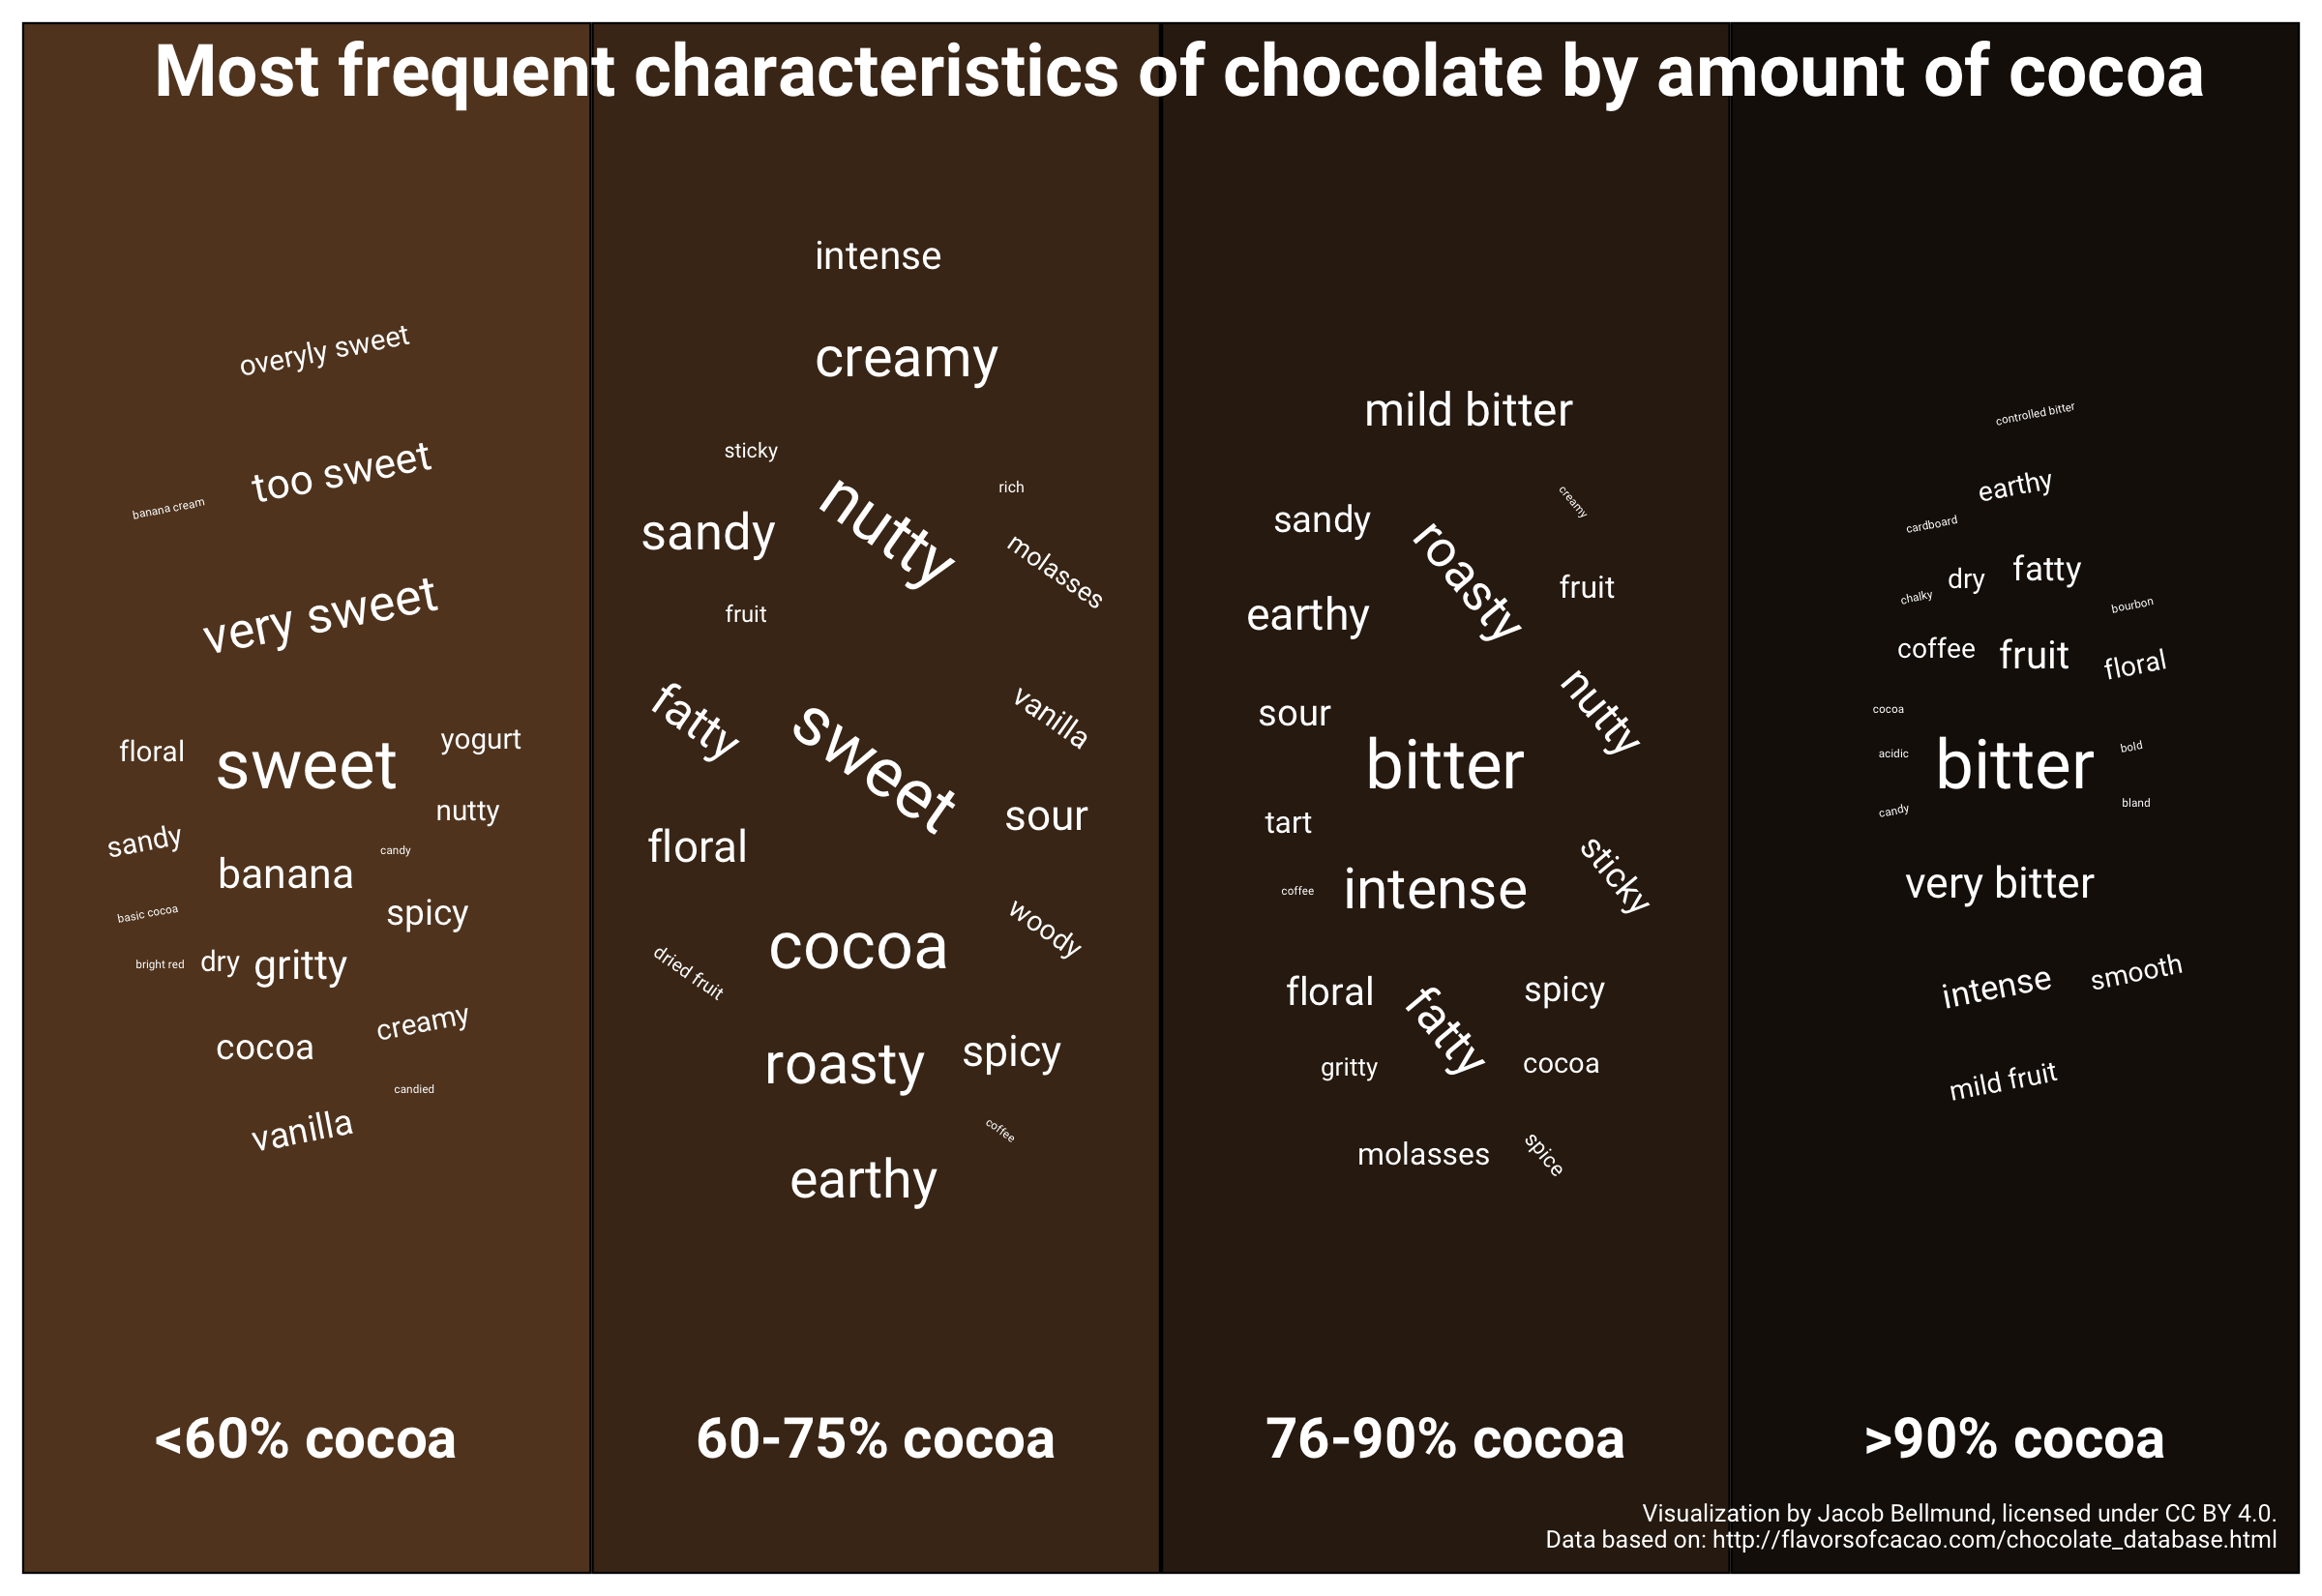 Word clouds showing the frequently used words used to describe chocolate with varying amounts of cocoa